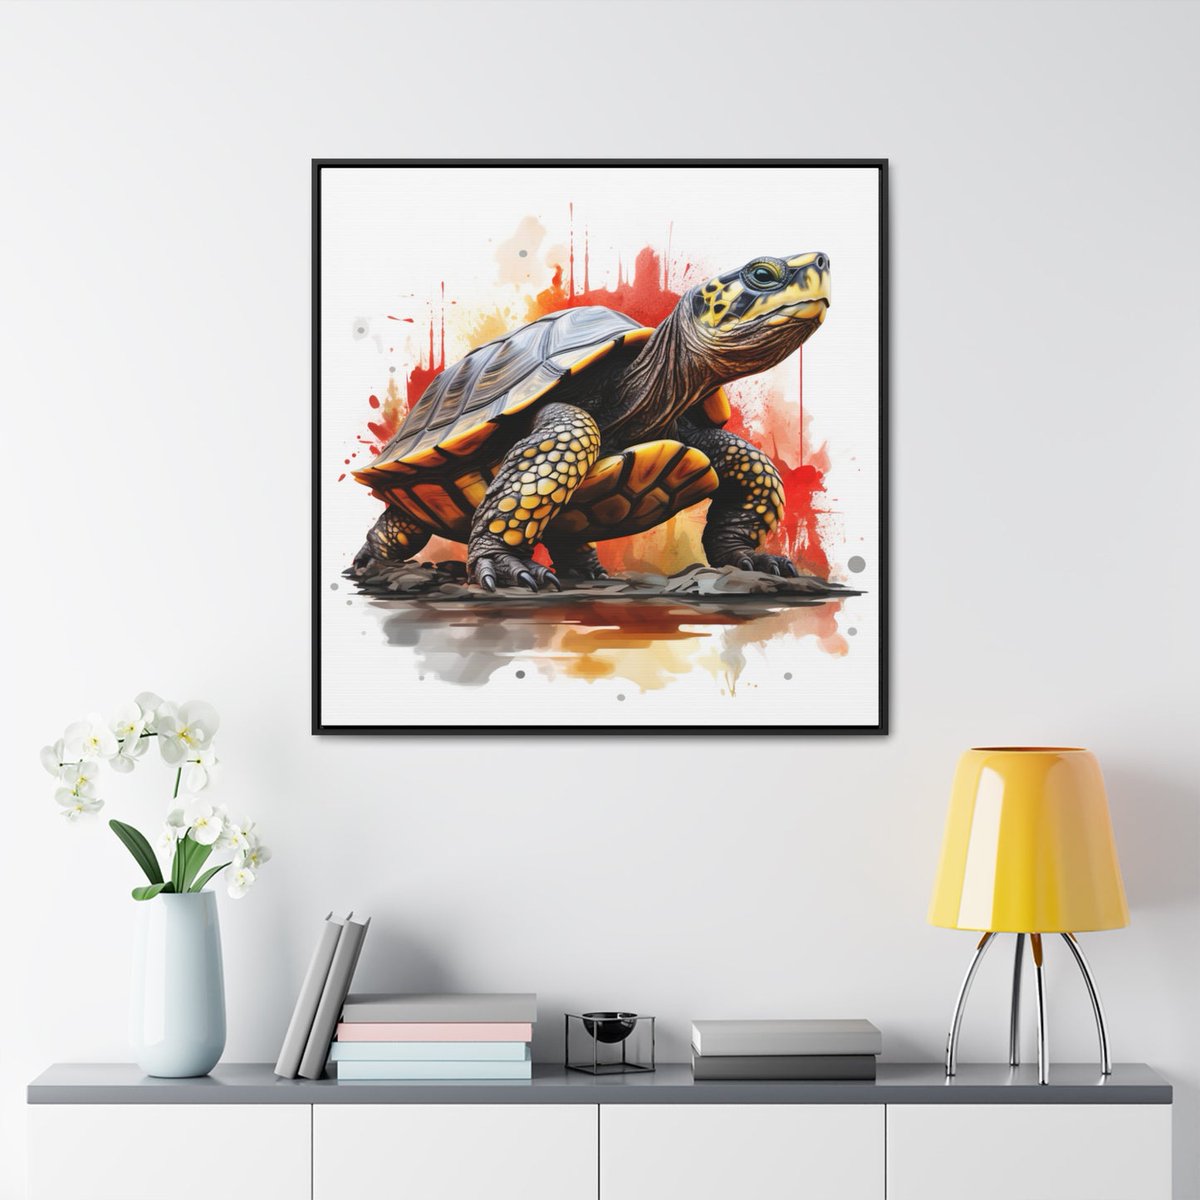 Shell Shock
Framed Collegiate Canvas
24'x24' - 30'x30' - 36'x36'
Walnut or black frame color

visualintensity.com/products/shell…

#maryland #terrapins #terps #wallart #canvasprint #visualintensity